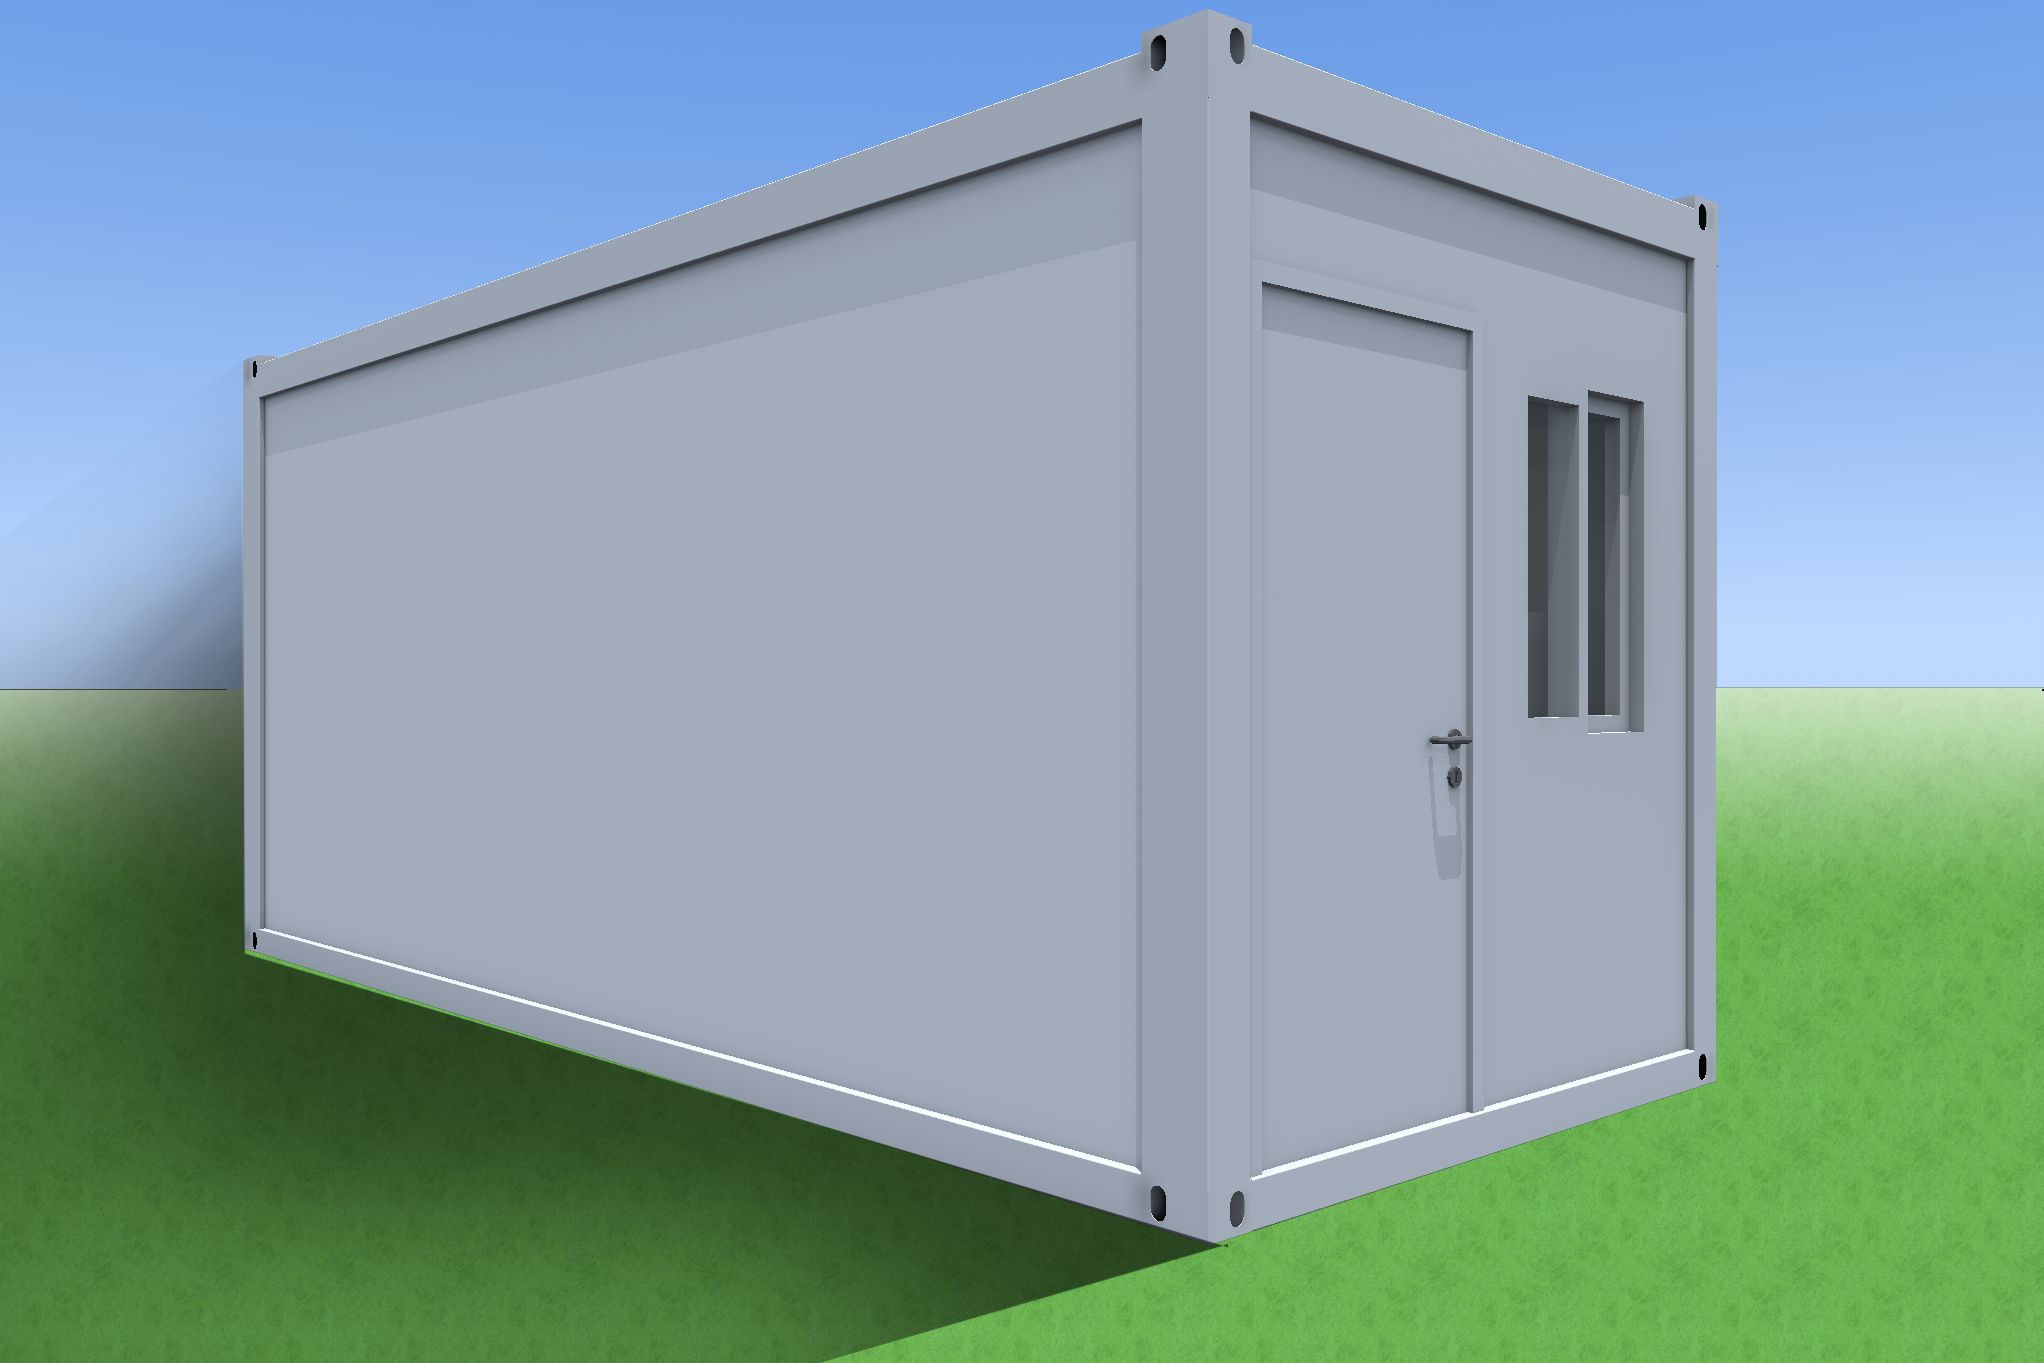 Materials of Container House